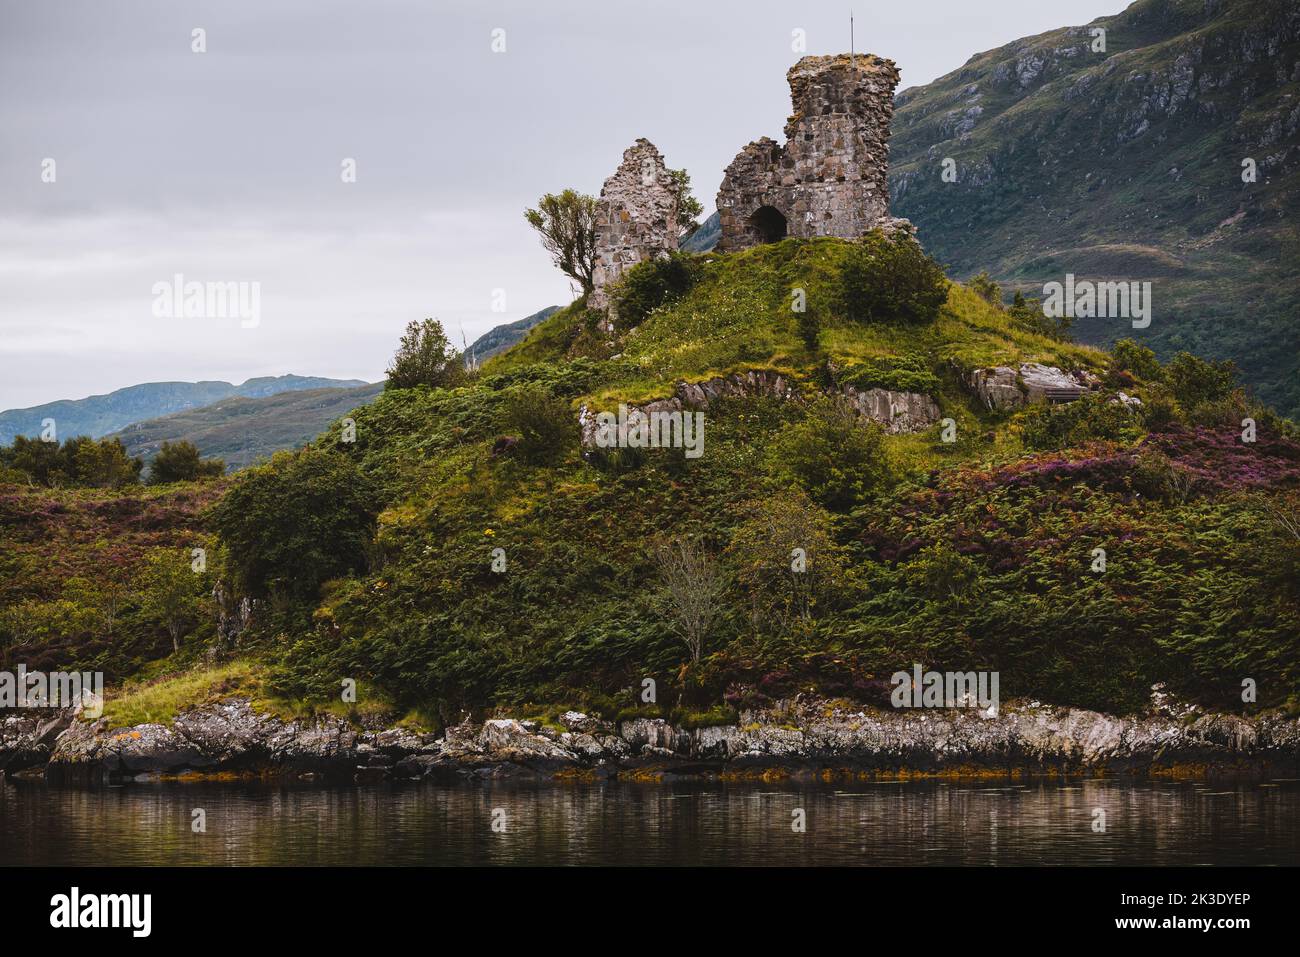 Caistel Maol ruins near Kyleakin isle od skye, these ruins date from around, 900Ad. Castle Moil. Stock Photo